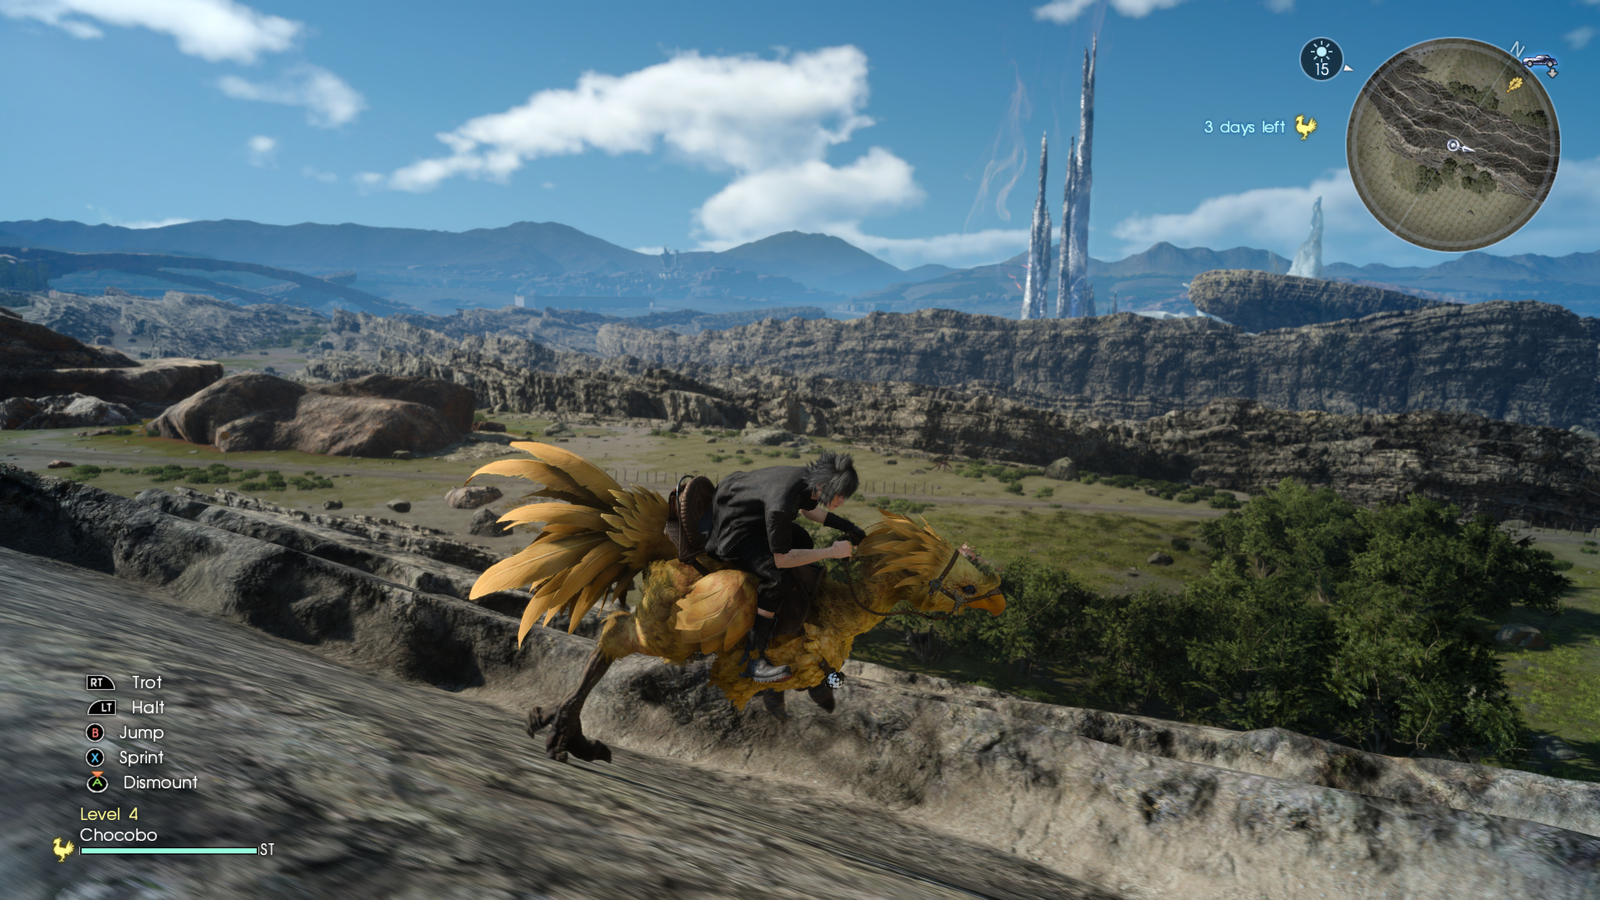 Final Fantasy XV aiming for 1080p on PS4 Pro via patch